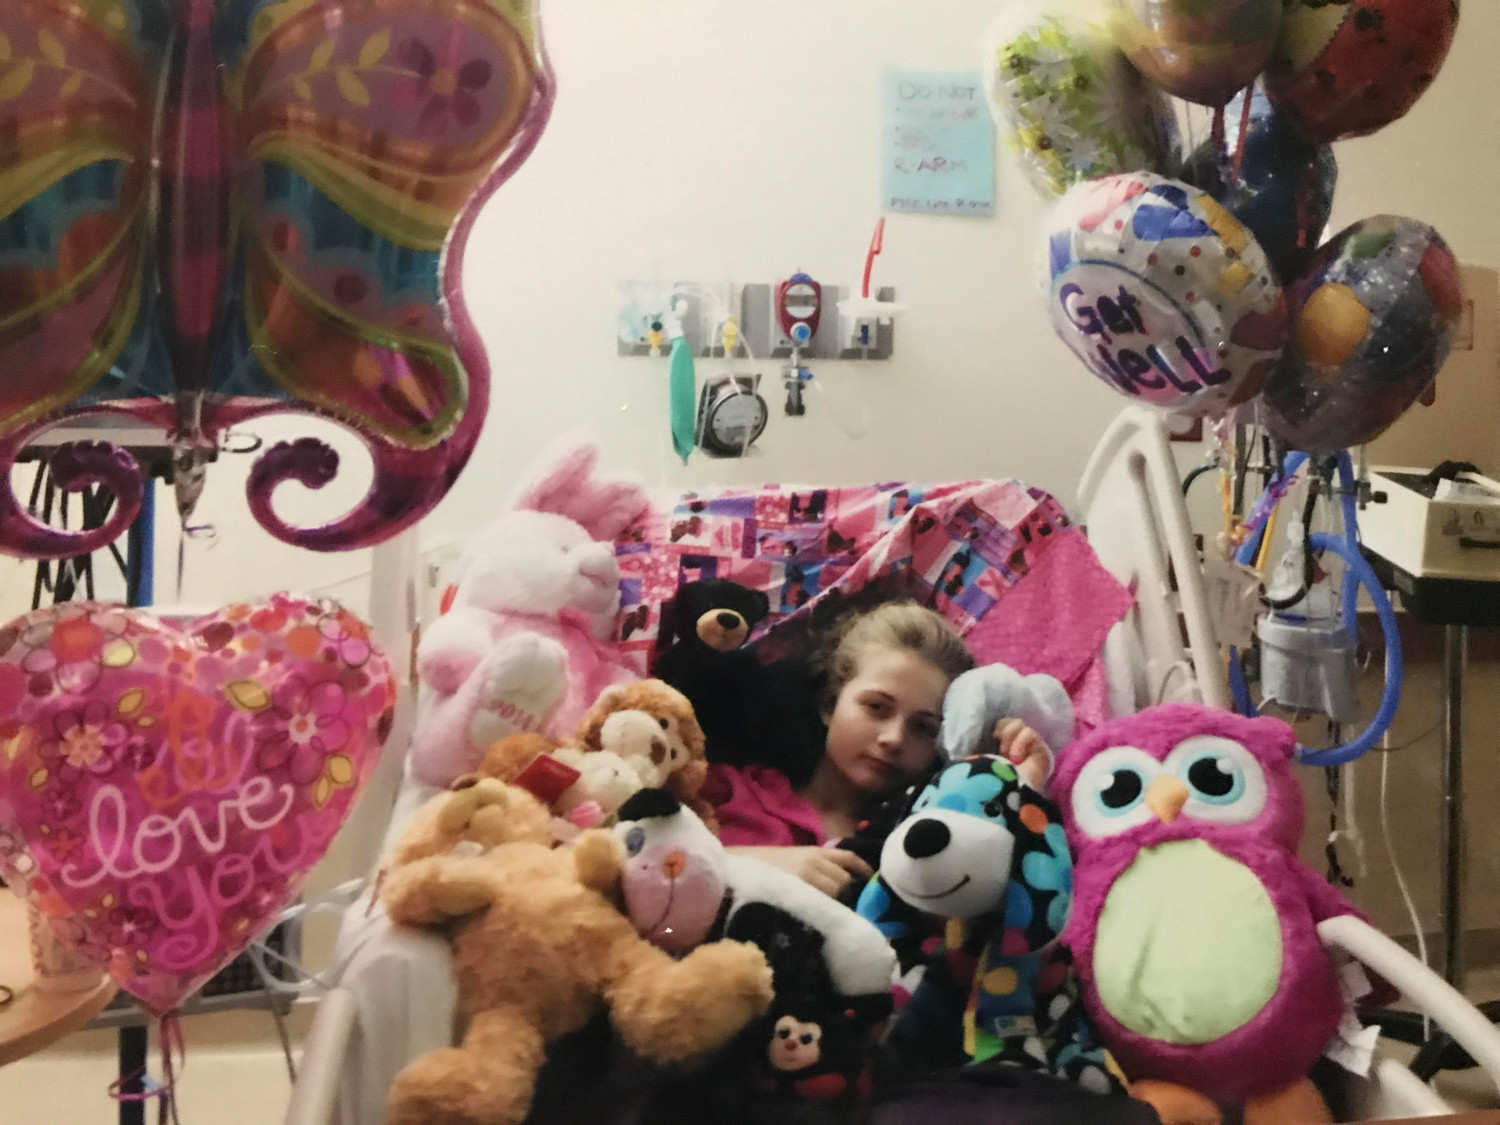 Kora Kolle got the idea for holding a stuffed animal drive for children after a long stay in the hospital where she was surrounded by a phalanx of fluffy friends that gave her comfort when she most needed it.